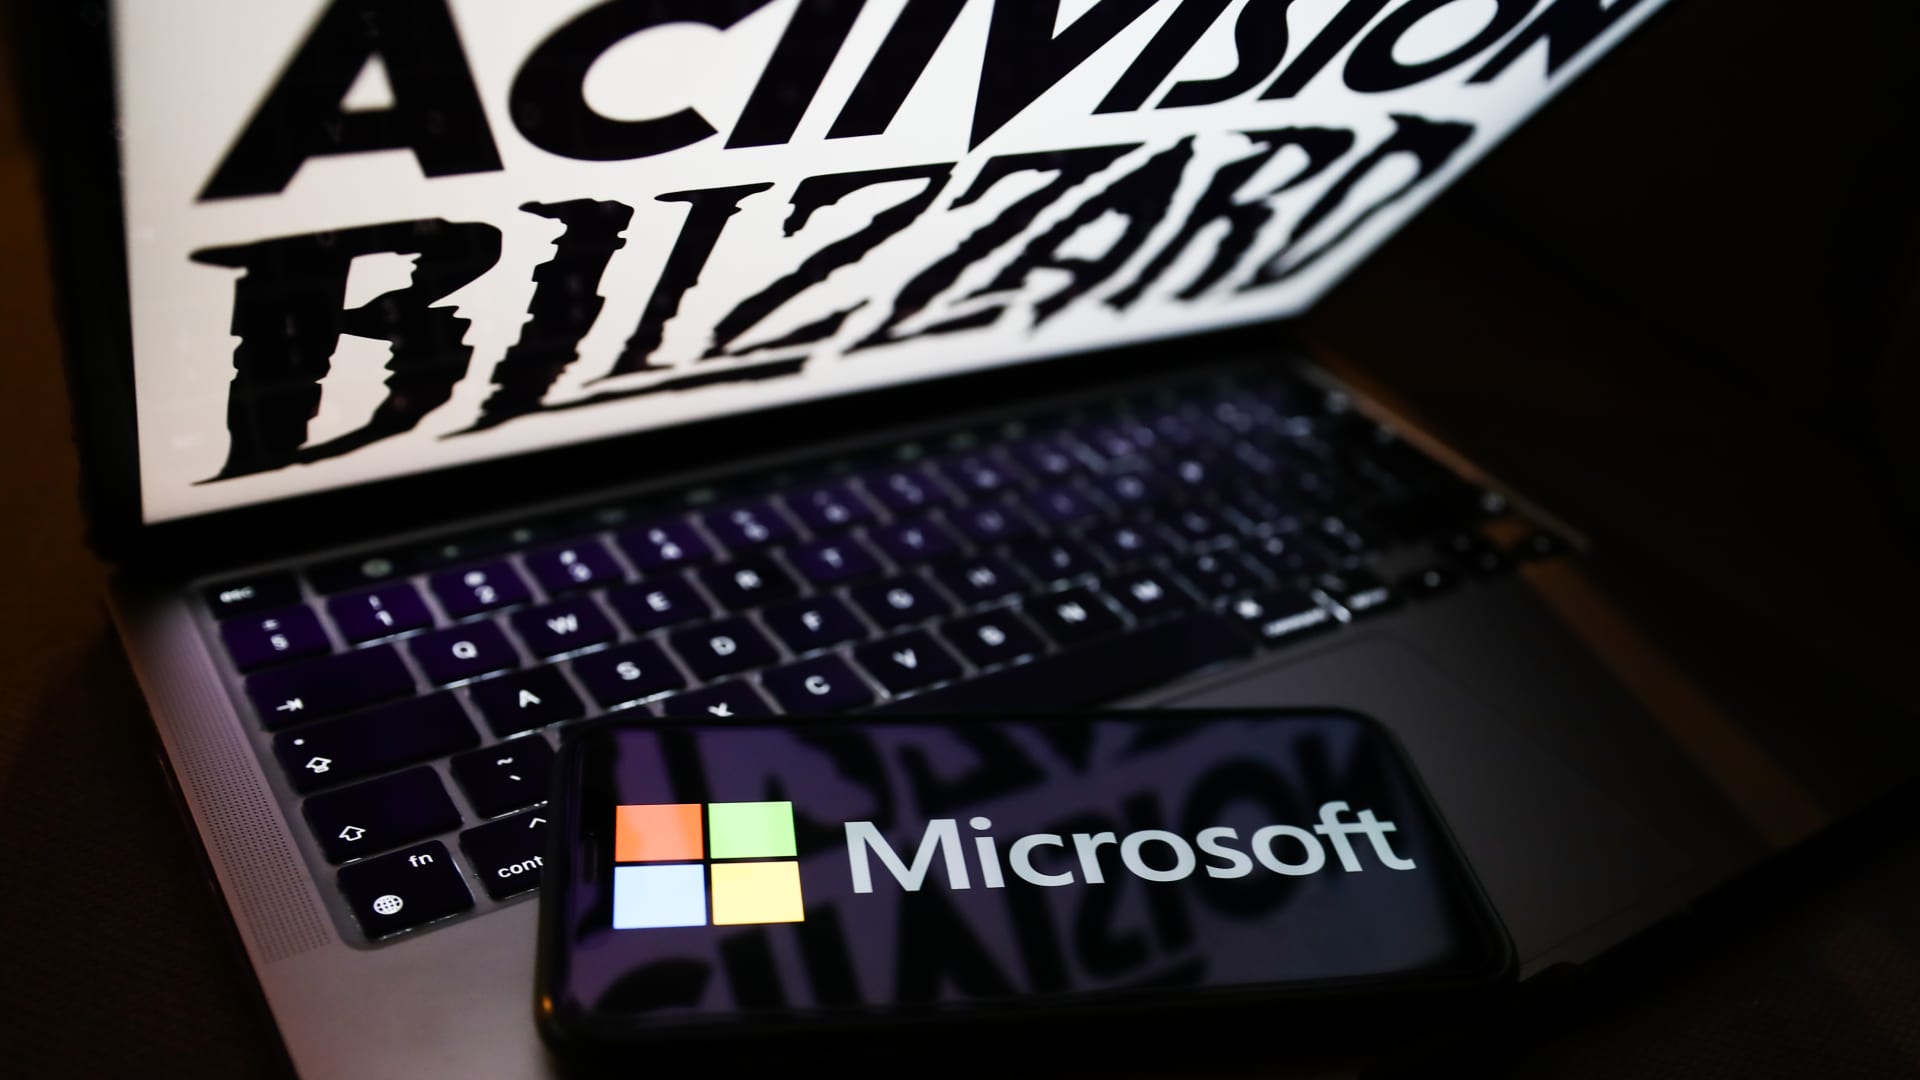 UK regulator says it may clear Microsoft’s new Activision Blizzard takeover offer